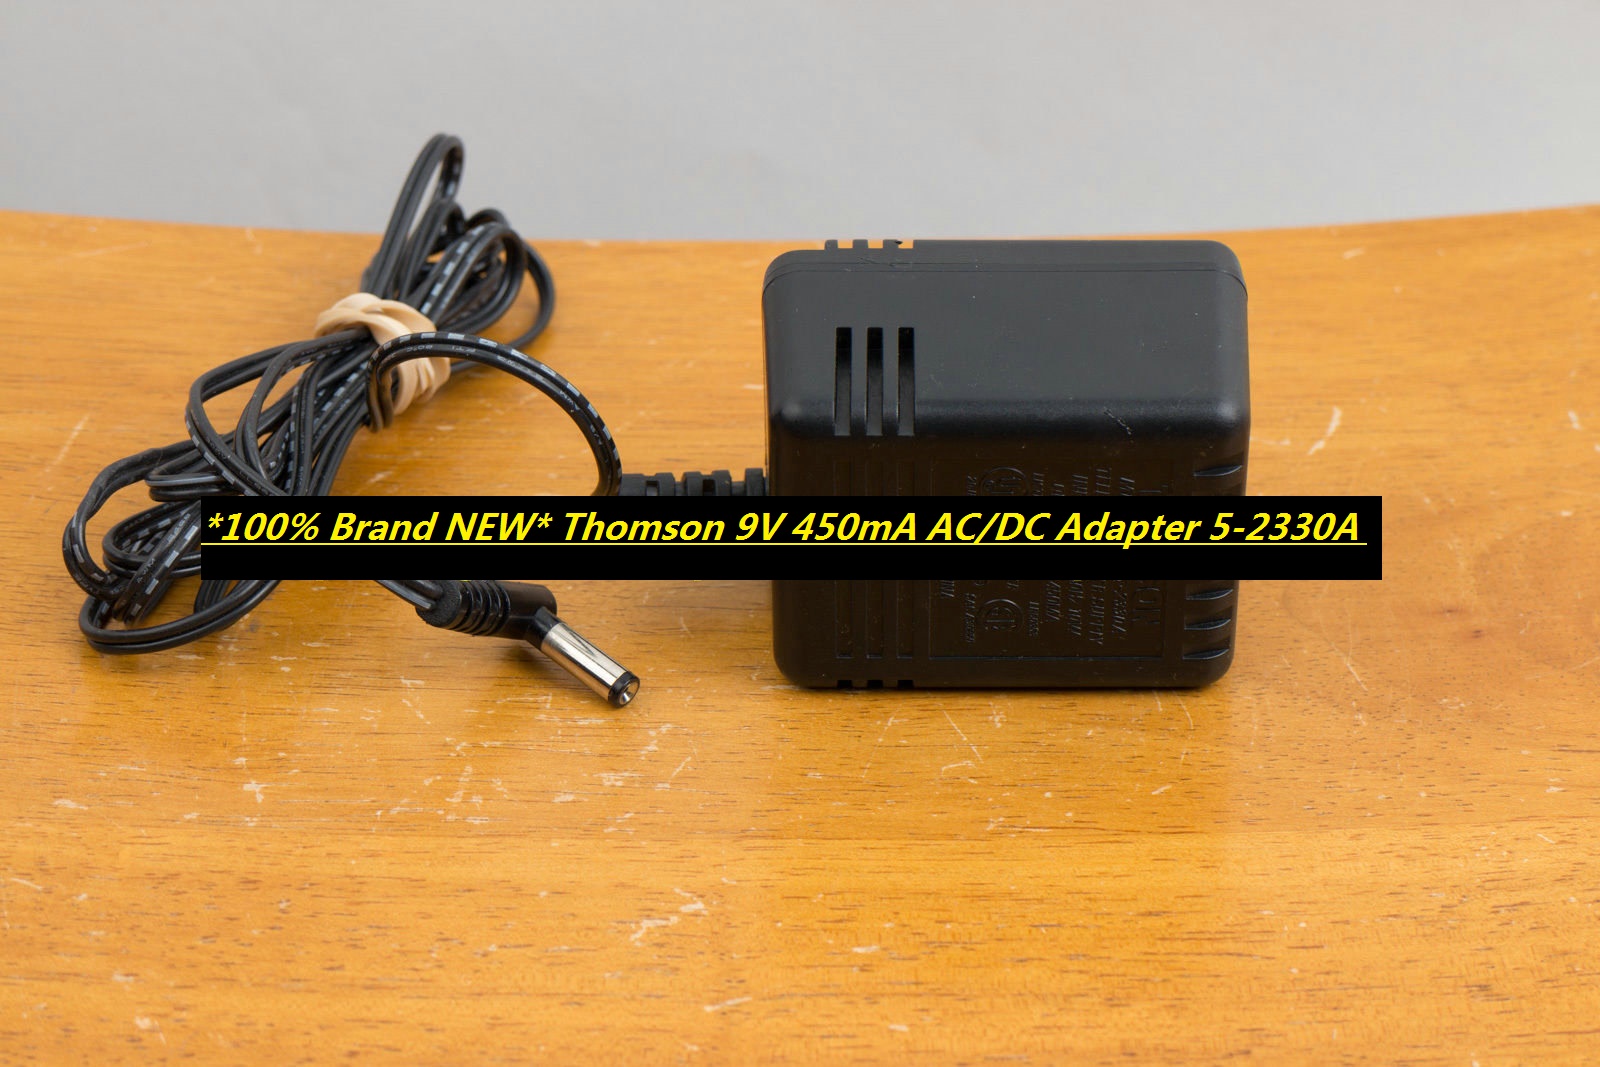 *100% Brand NEW* Thomson 9V 450mA AC/DC Adapter 5-2330A Power Supply - Click Image to Close